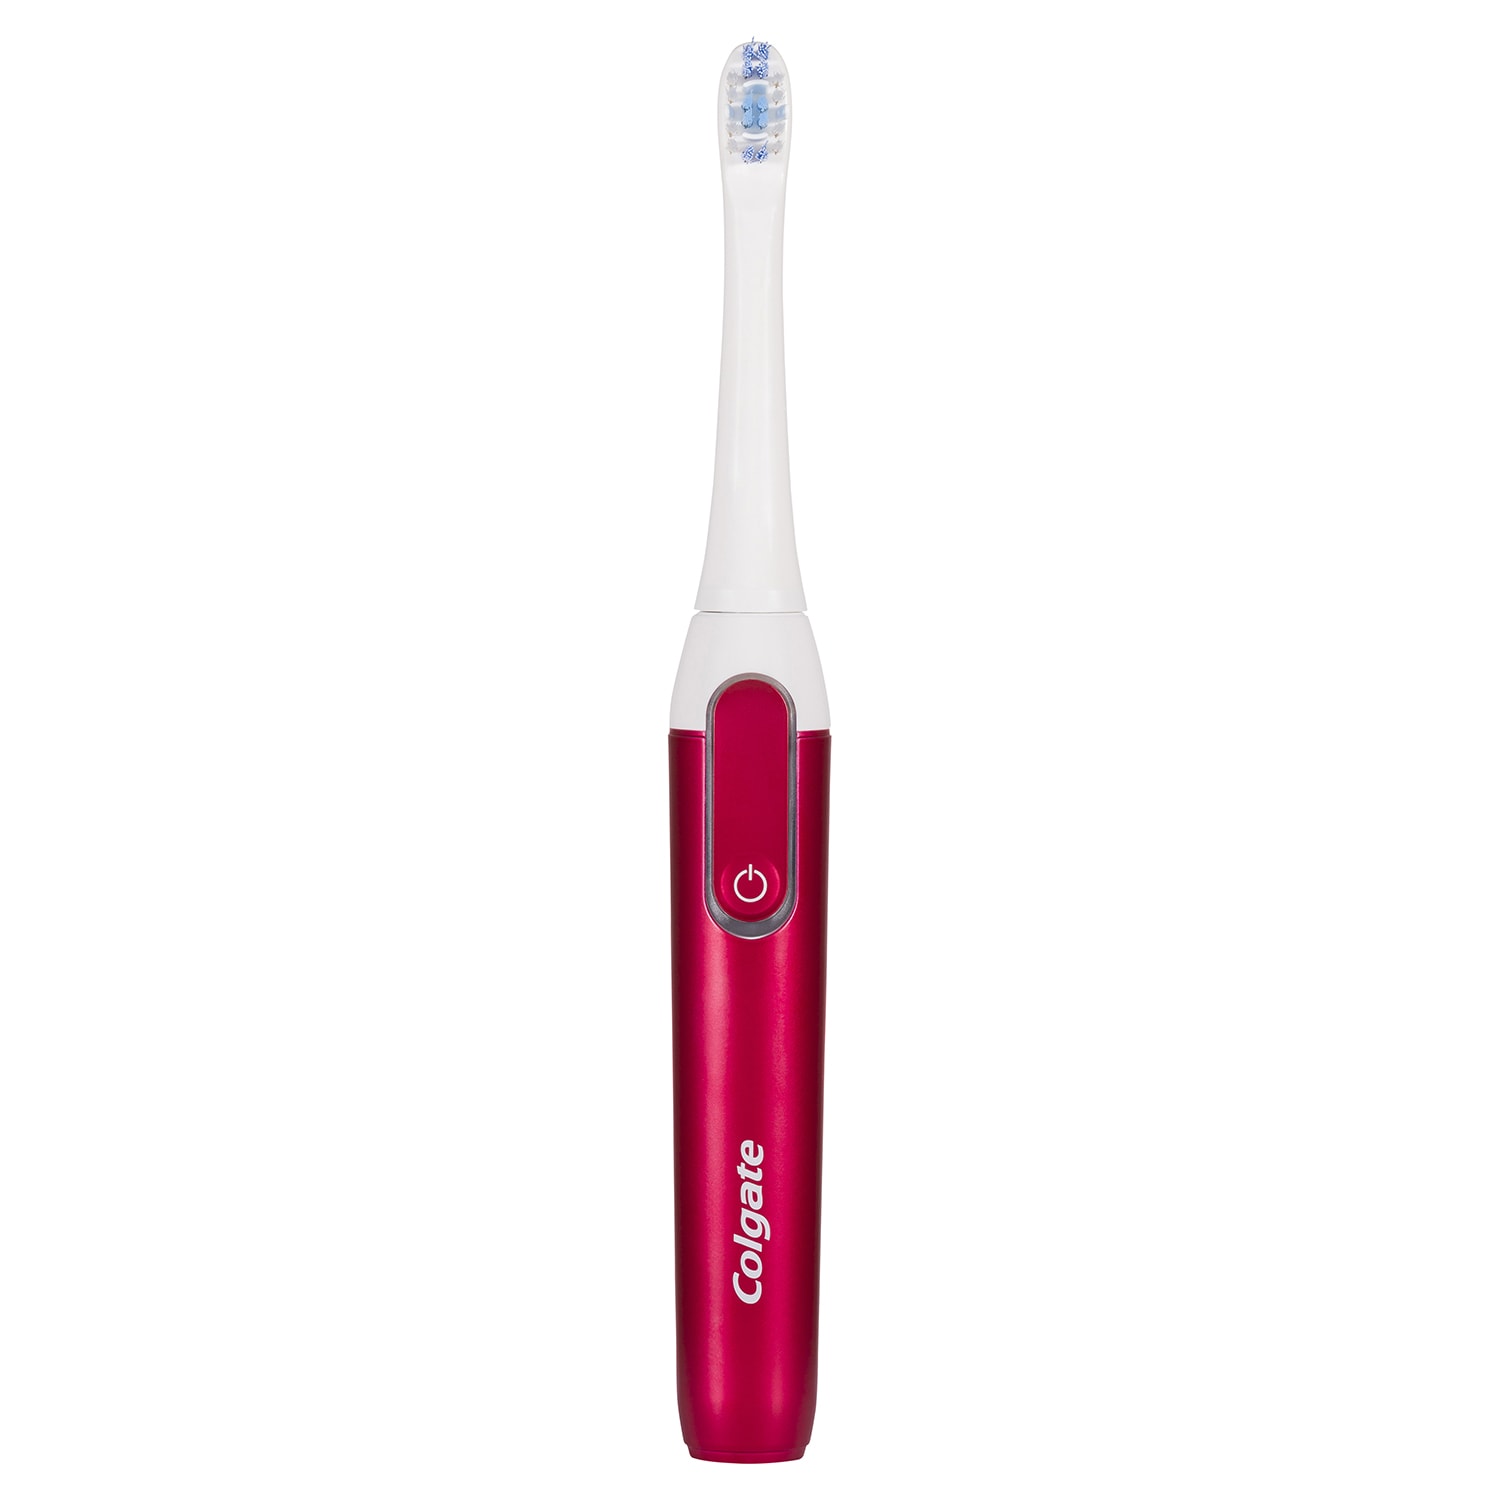 Colgate Pro Electric Toothbrush Clinical 500R Whitening Rechargeable